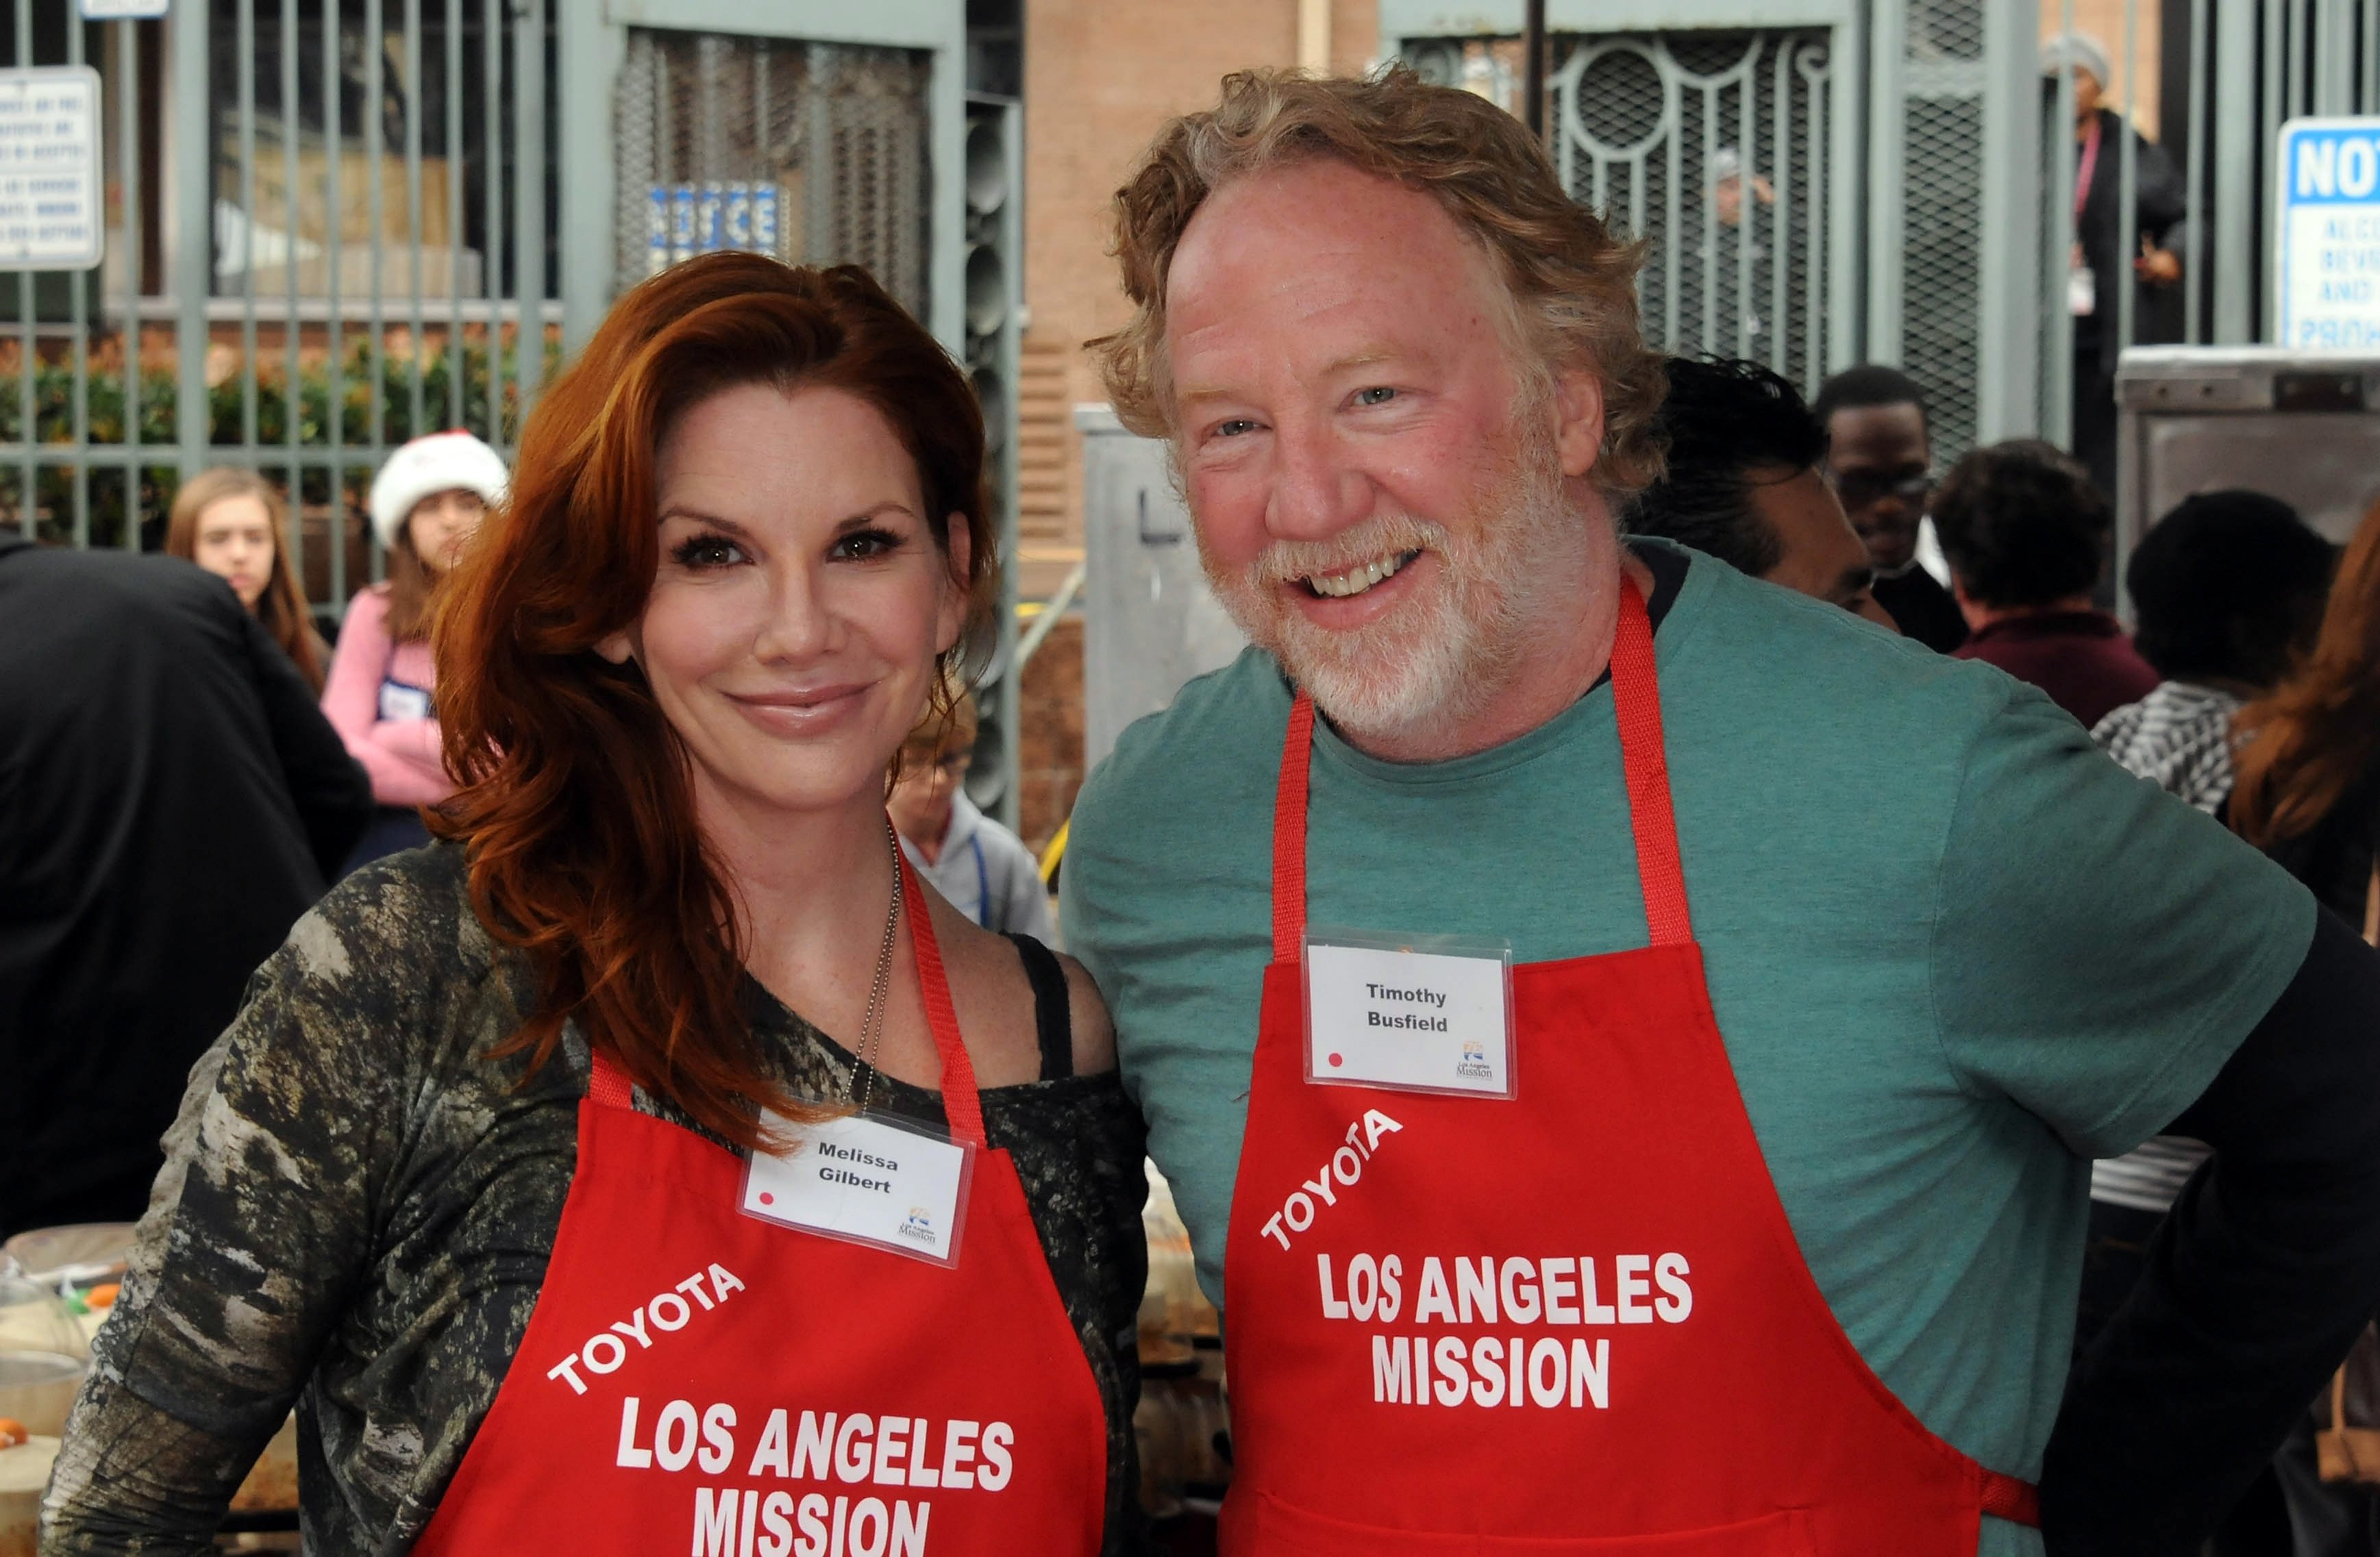 Actress Melissa Gilbert and actor Timothy Busfield participate in the Los Angeles Mission Christmas Eve lunch For The Homeless held at the Los Angeles Mission on December 24, 2012 in Los Angeles, California | Source: Getty Images